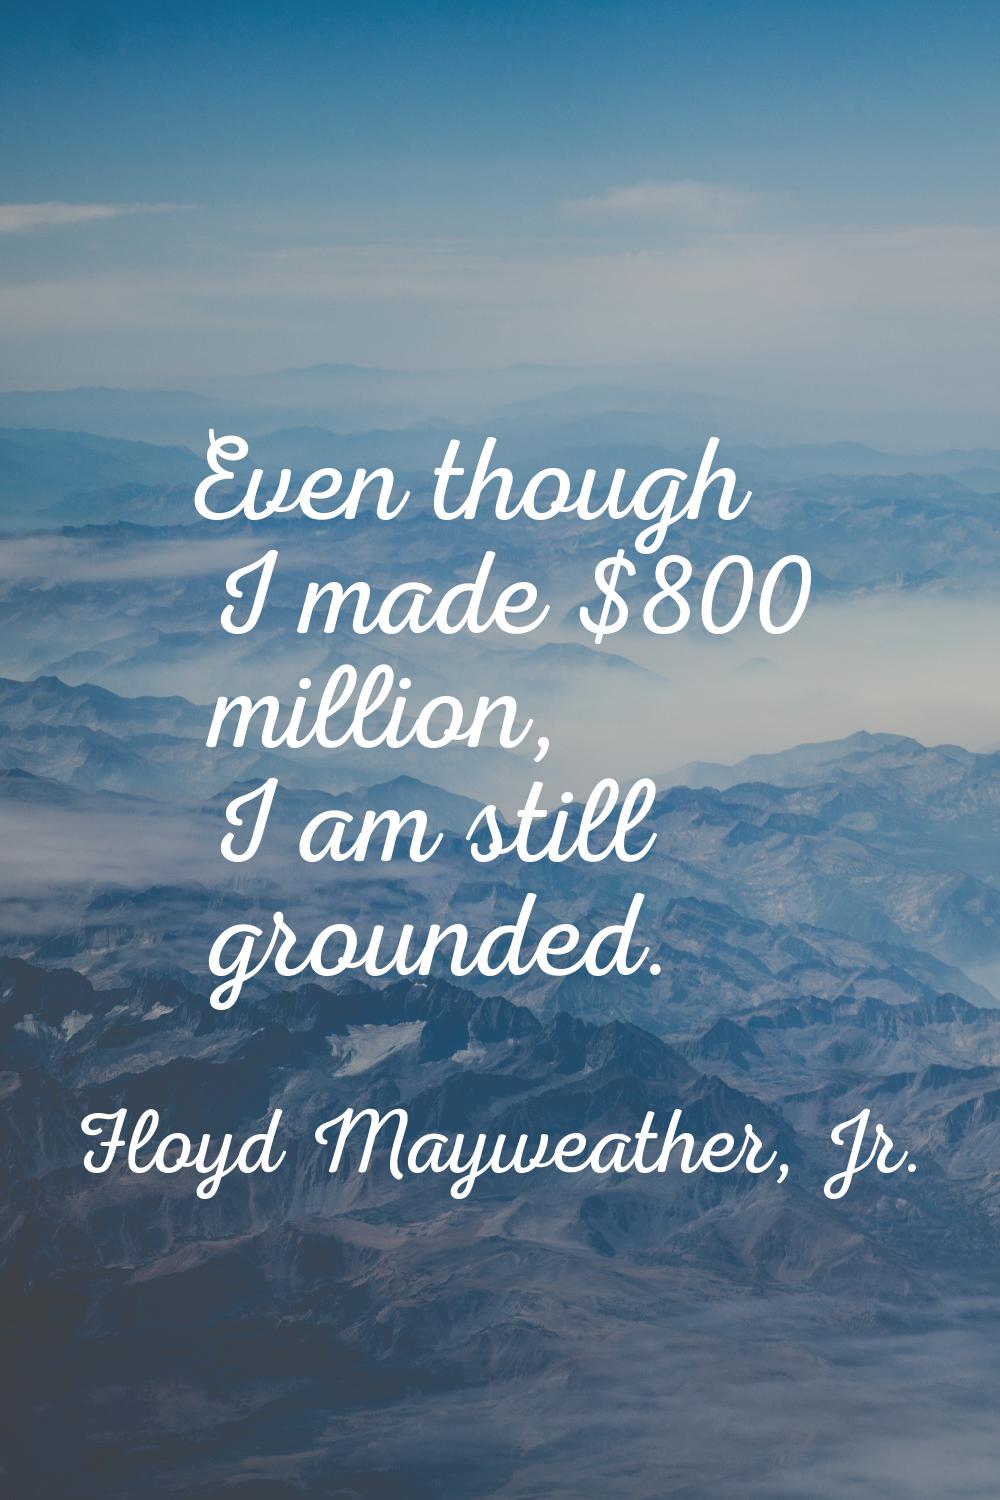 Even though I made $800 million, I am still grounded.